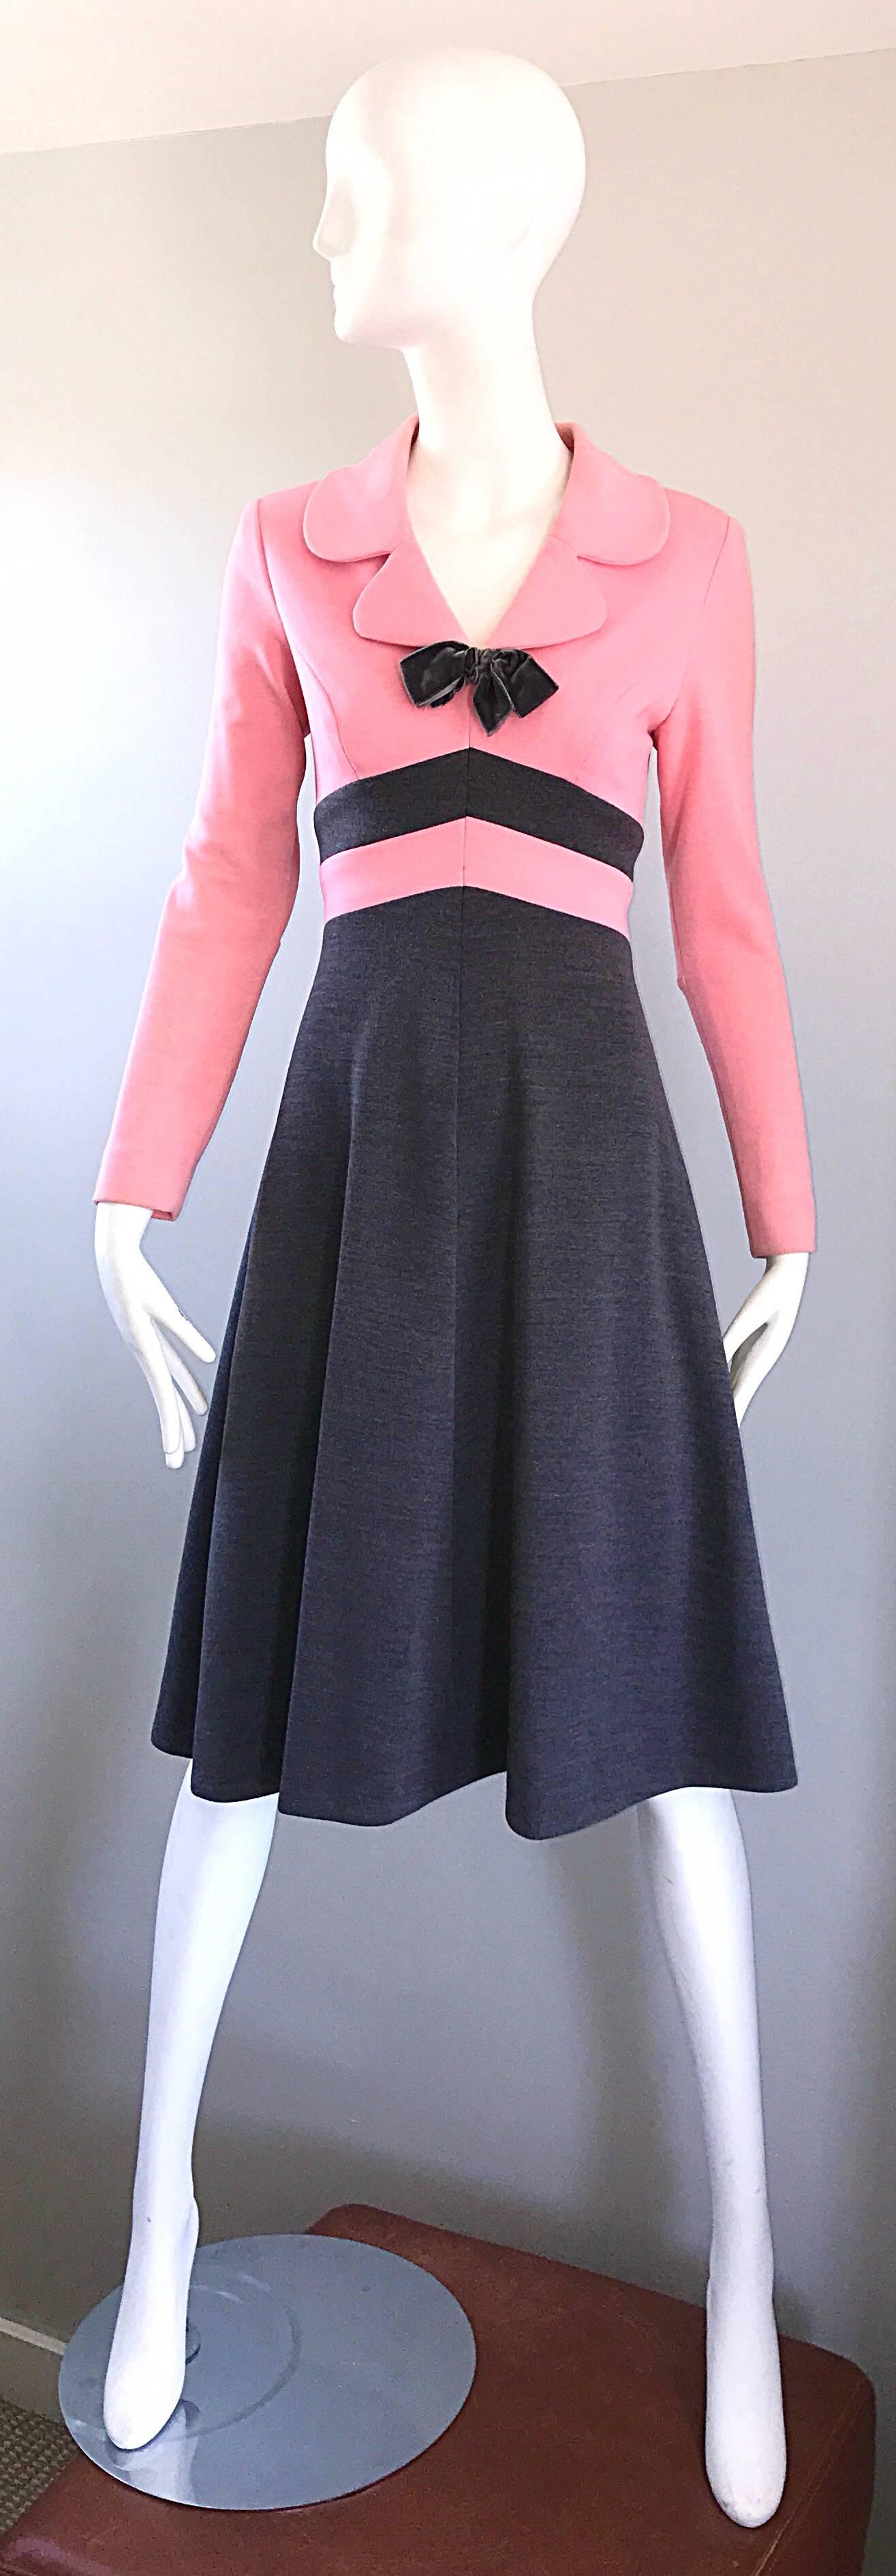 Insanely chic 1960s bubblegum pink and charcoal grey A Line knit dress! Features a chic collar with a grey velvet bow at center neck. Fitted bodice, sleek tailored sleeves, and a flattering full skirt. Hidden metal zipper up the back with